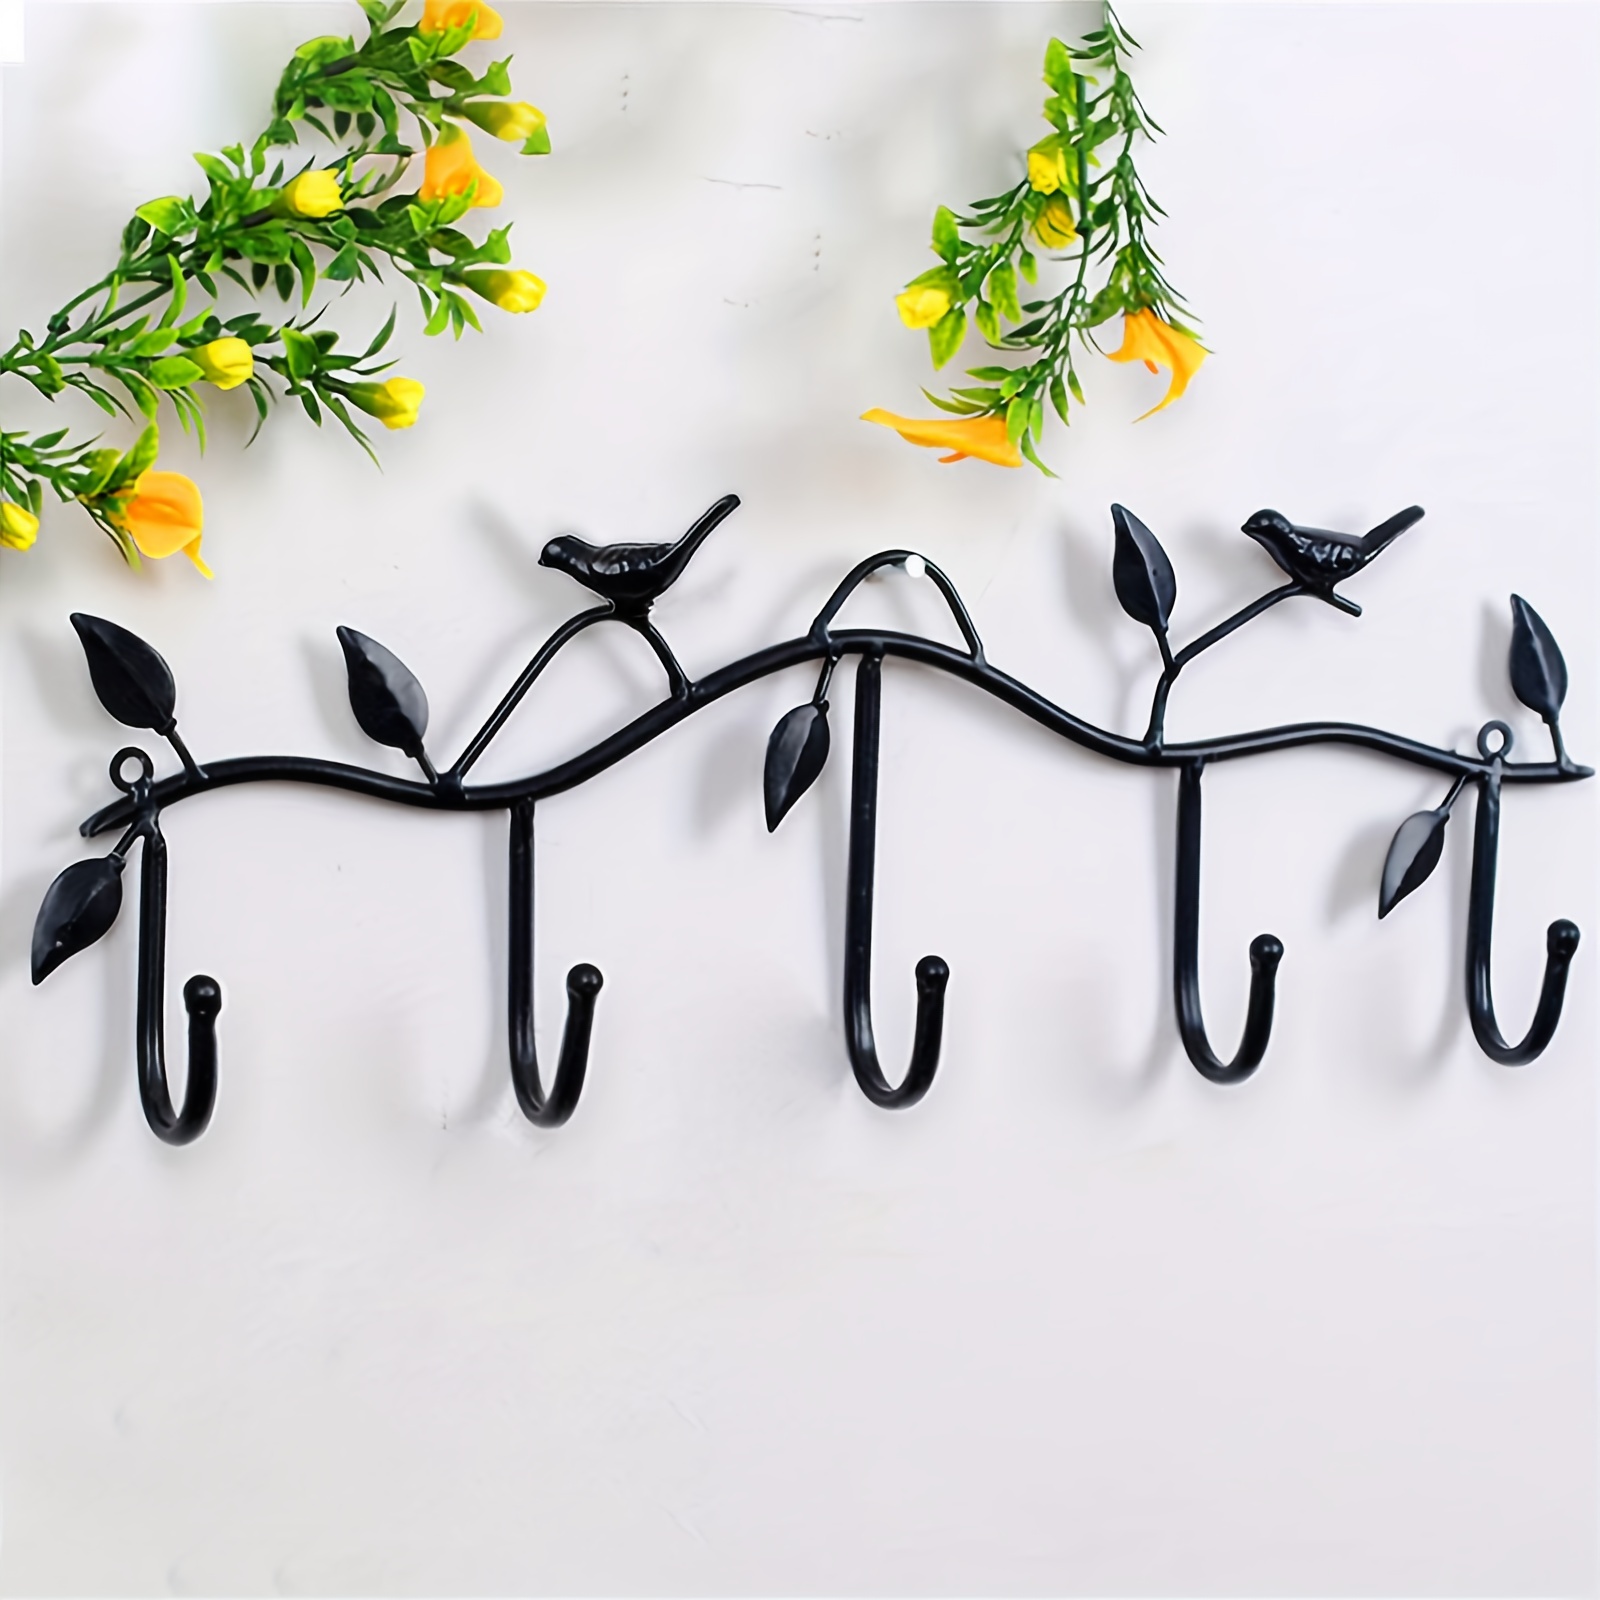 6PCS Big Heavy Duty Three Prongs Coat Hooks Wall Mounted with 12 Screws  Retro Double Utility Rustic Hooks for Thick Coat - AliExpress